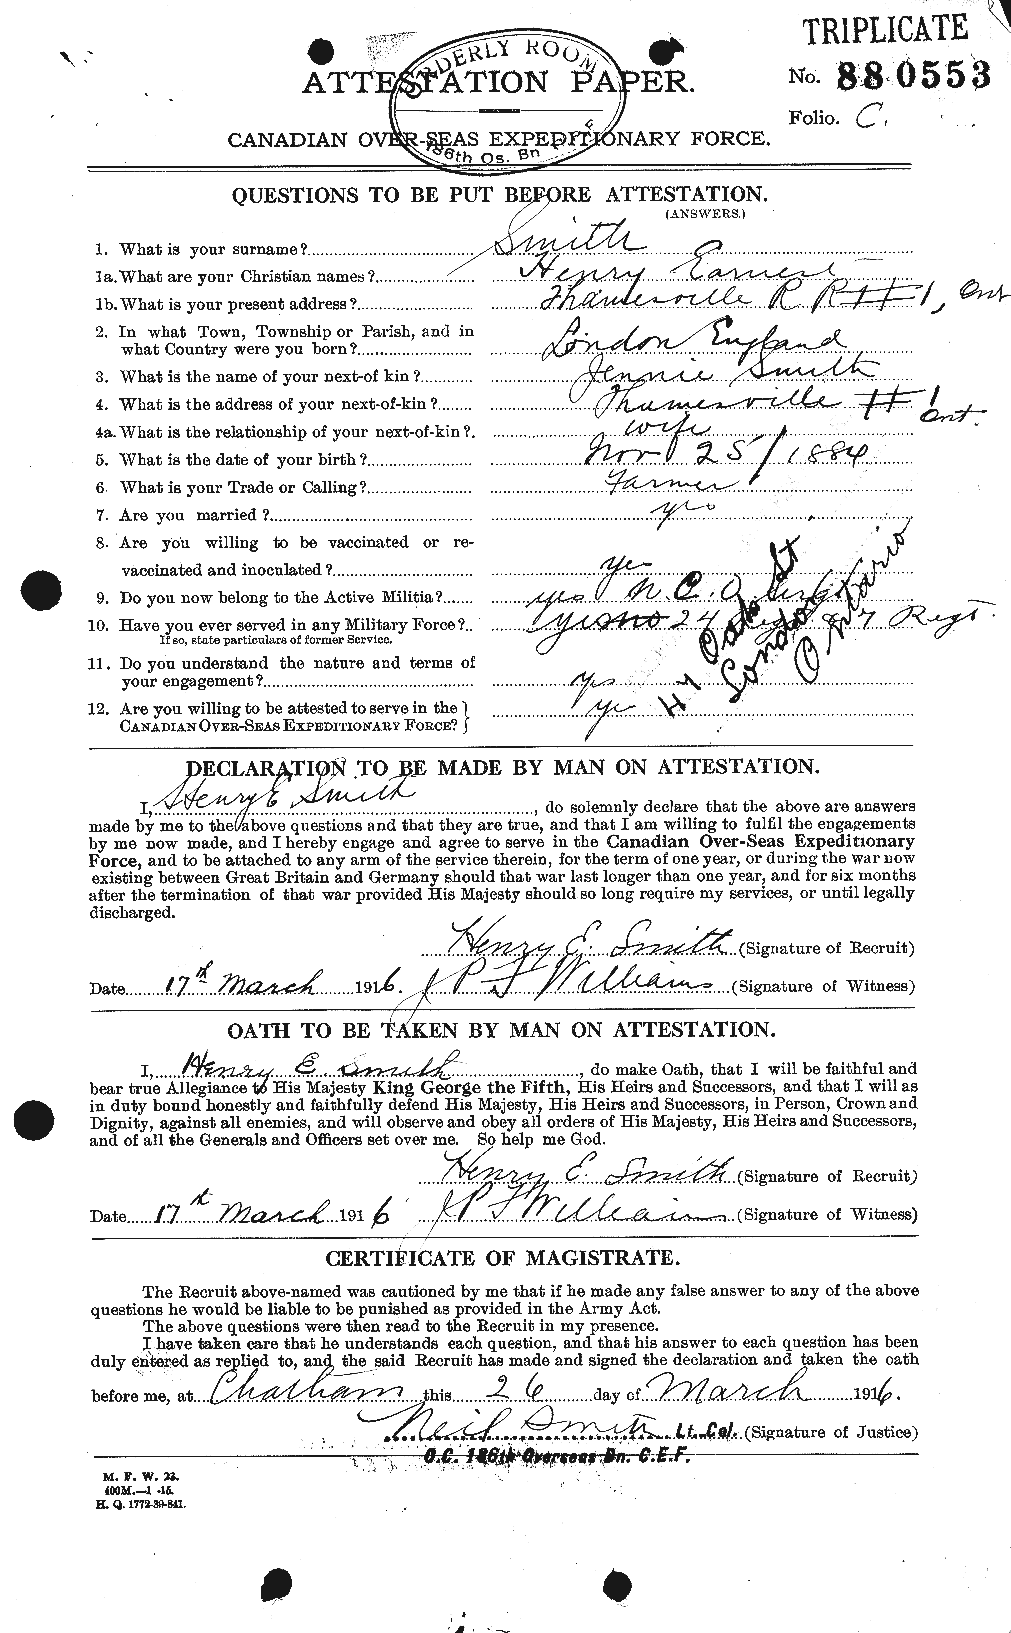 Personnel Records of the First World War - CEF 104983a